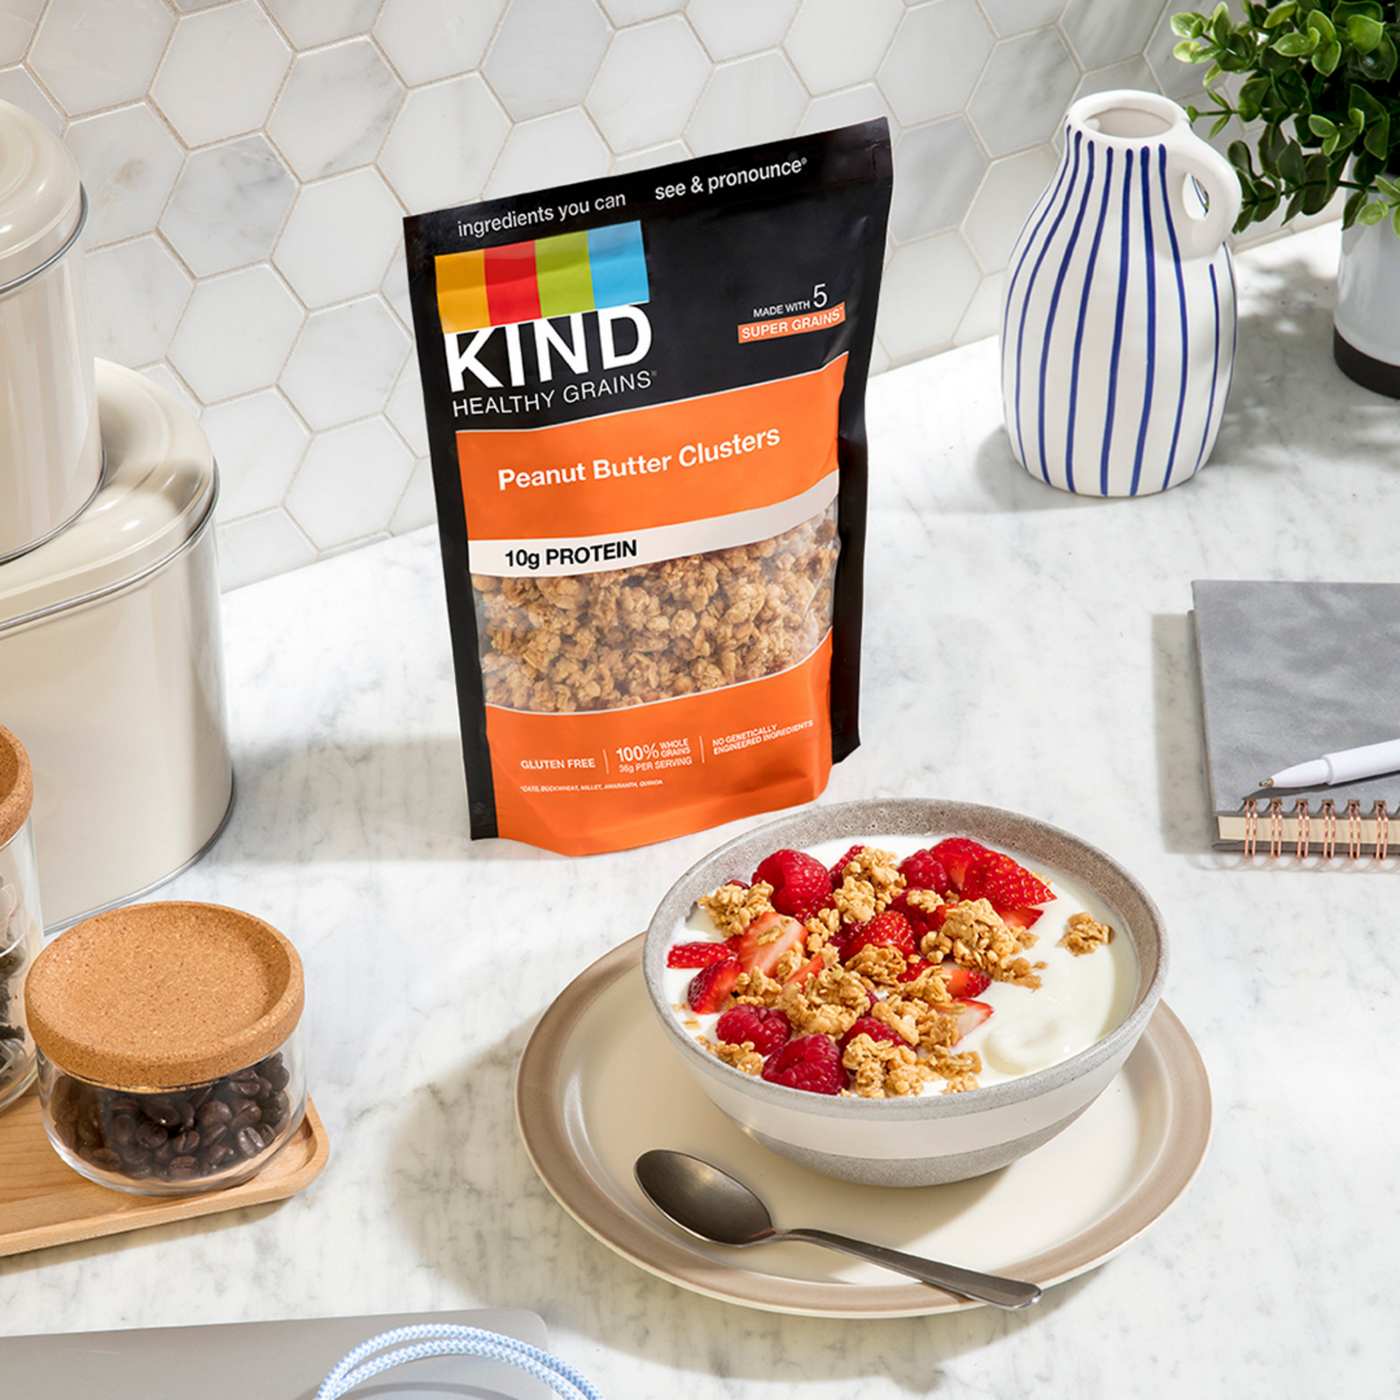 Kind Healthy Grains Granola - Peanut Butter Clusters; image 3 of 3